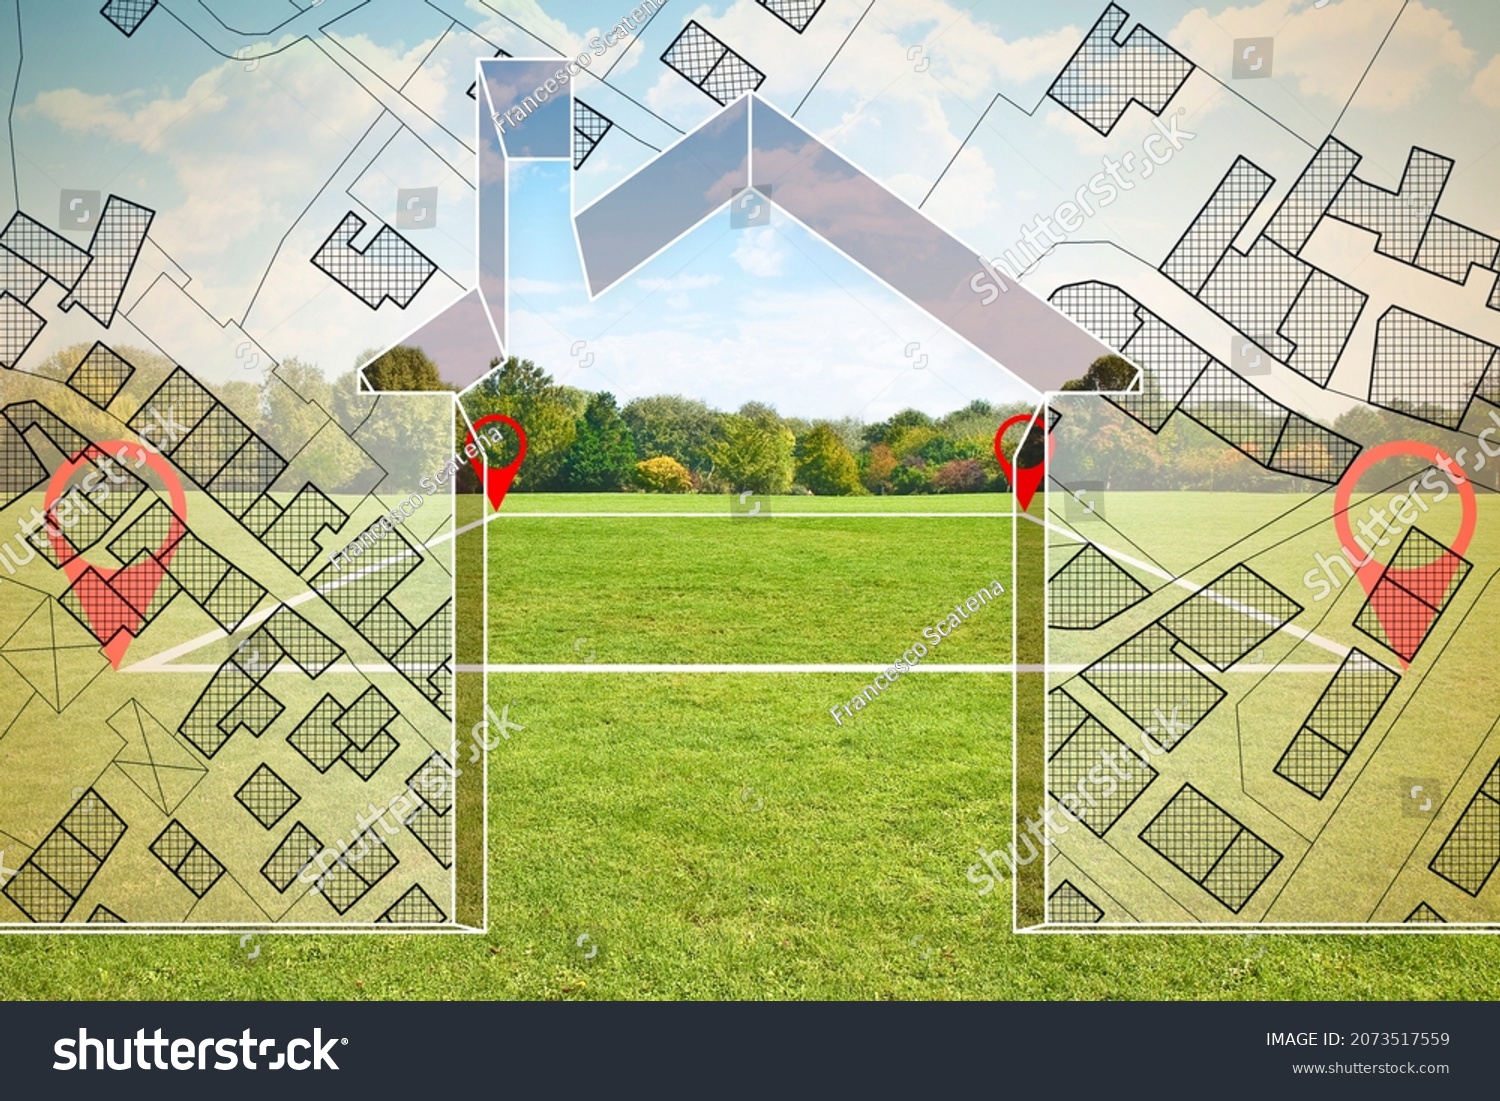 Land plot management - Imaginary city map with buildings, land parcels and home silhouette - real estate concept with a vacant land on a green field available for building construction #2073517559